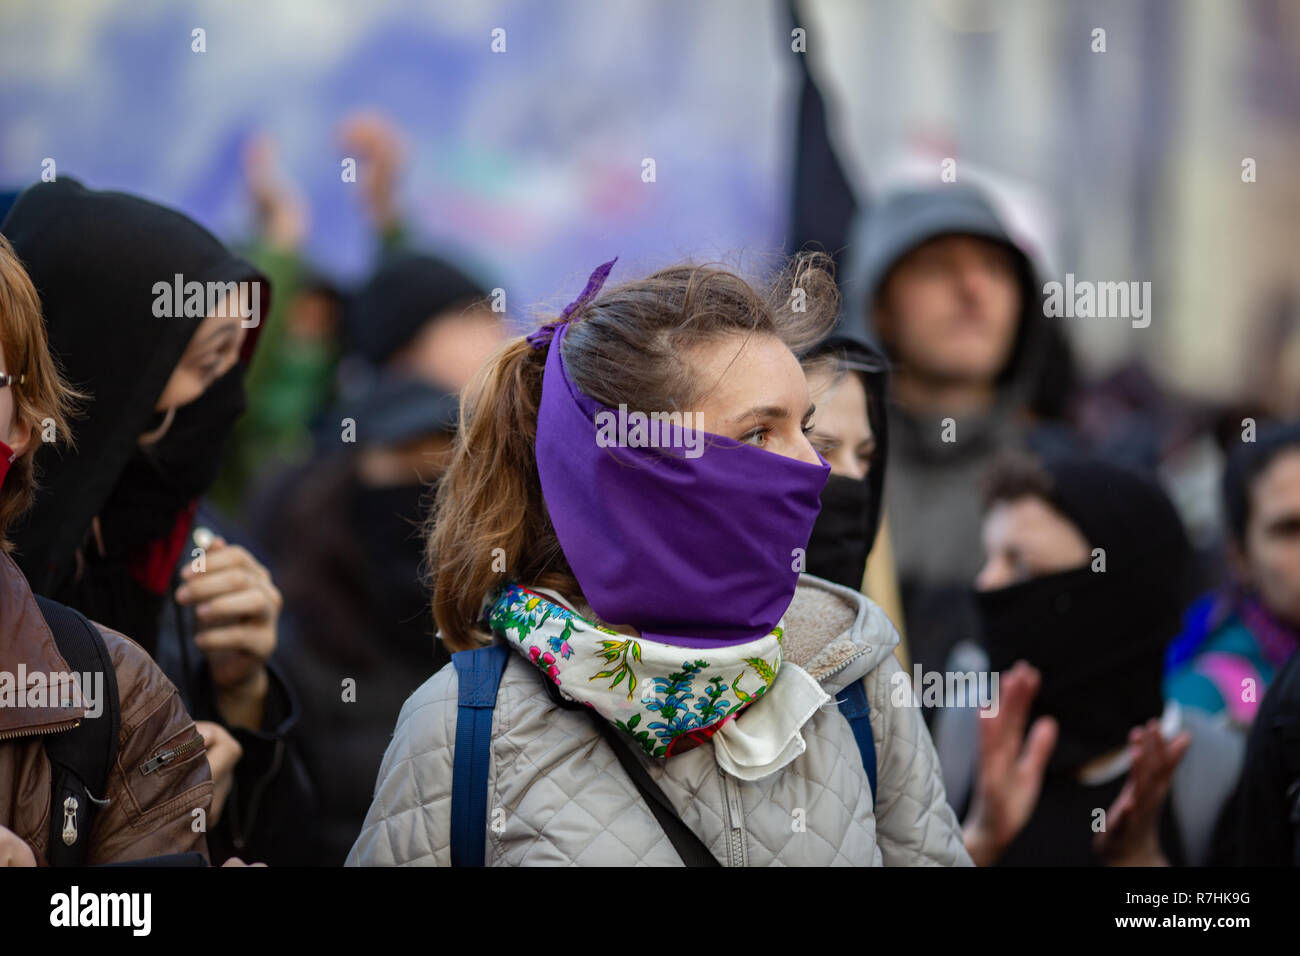 An Anti-Facist demonstrator covers her mouth as purple smoke billows behind her.  3,000 Pro-Brexit demonstrators and 15,000 Anti-Facist counter demonstrators took to the streets of London to voice their stance on the deal ahead of the key Brexit vote in parliament this Tuesday. Stock Photo